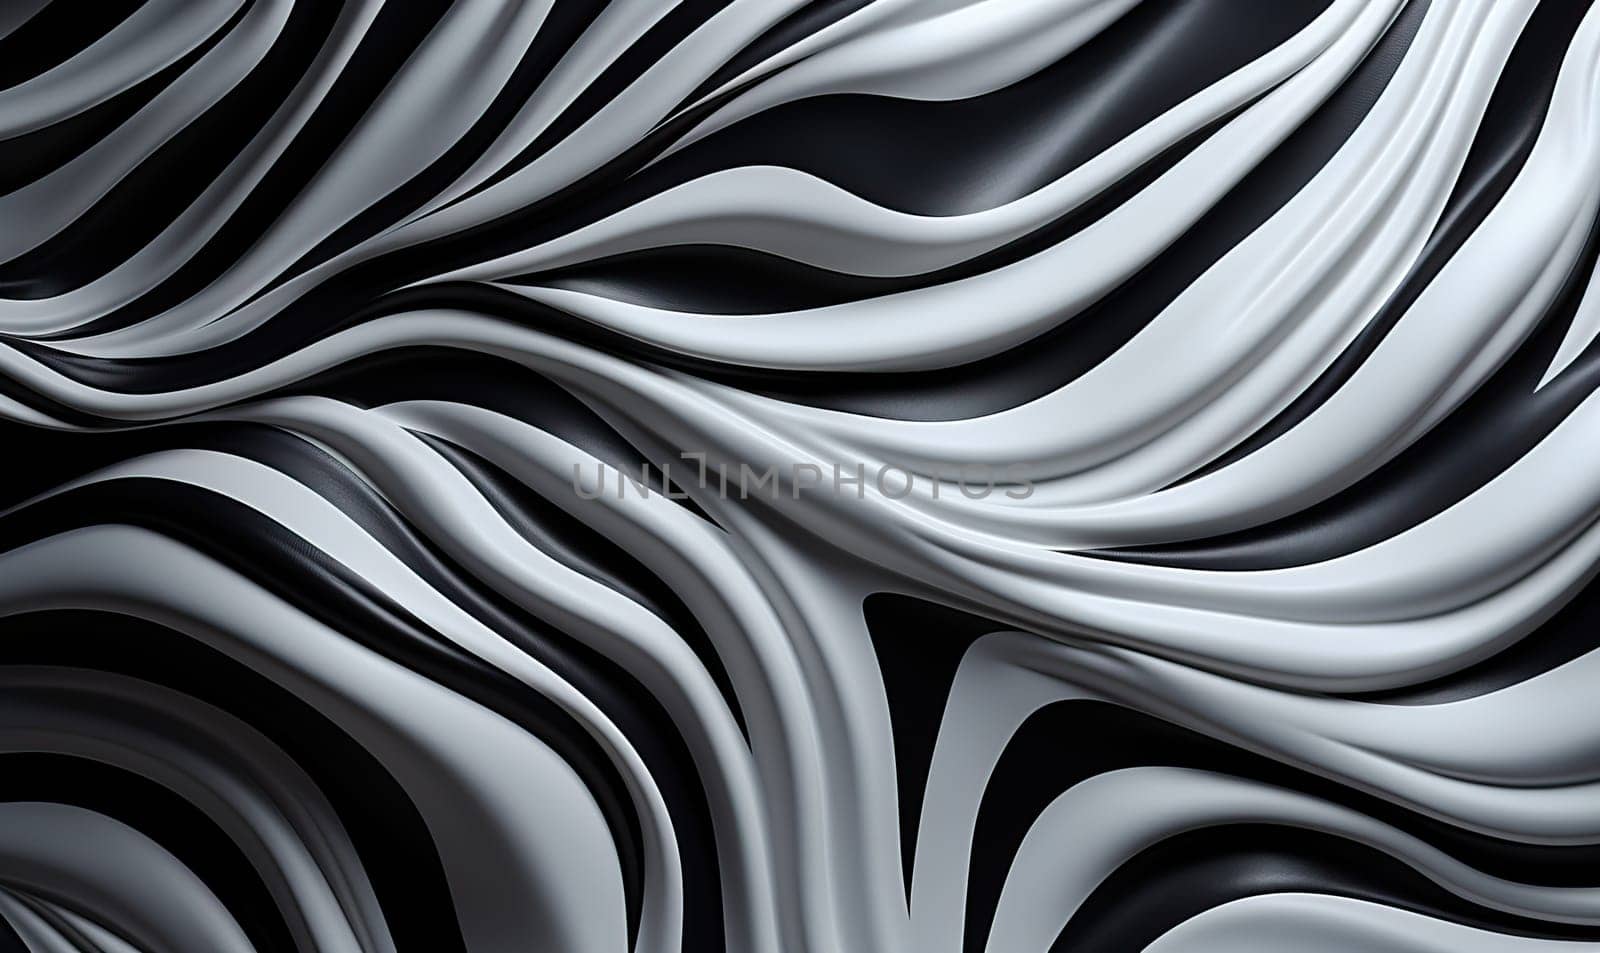 Abstract background, black and white stripes of Zebra. Selective soft focus.